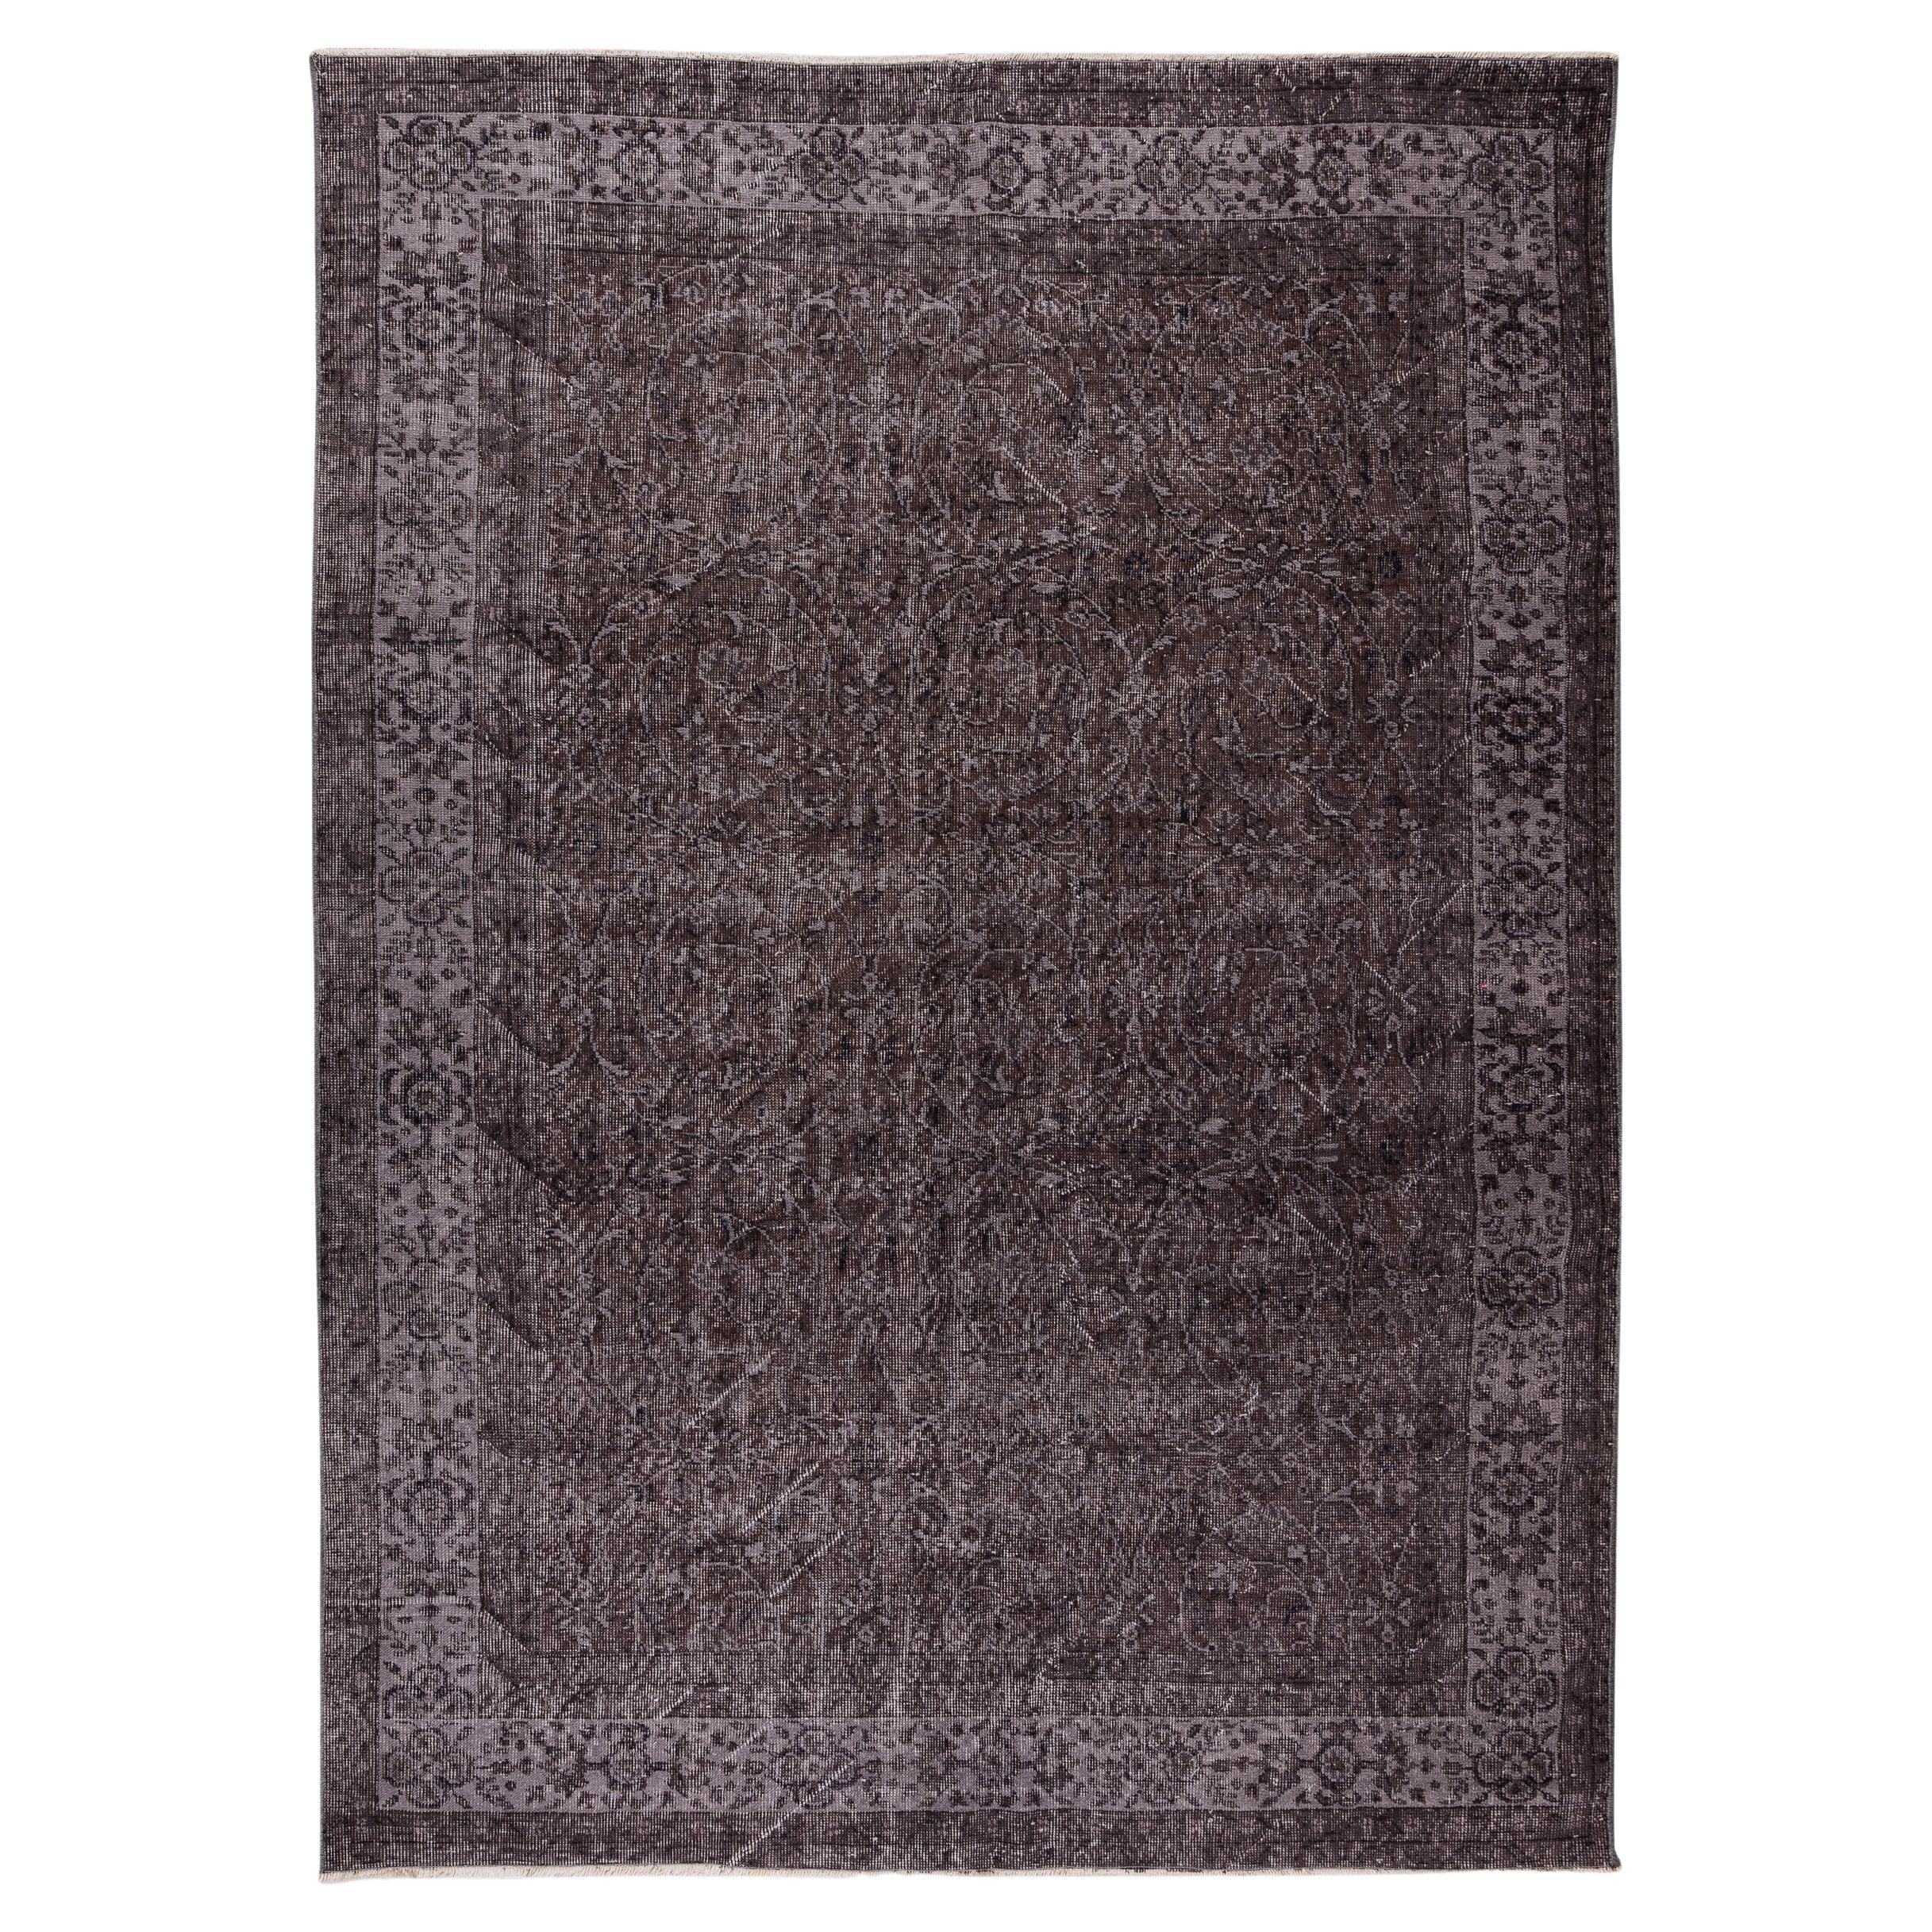 6.4x8.8 Ft Handmade Vintage Turkish Wool Rug Re-Dyed in Brown 4 Modern Interiors For Sale